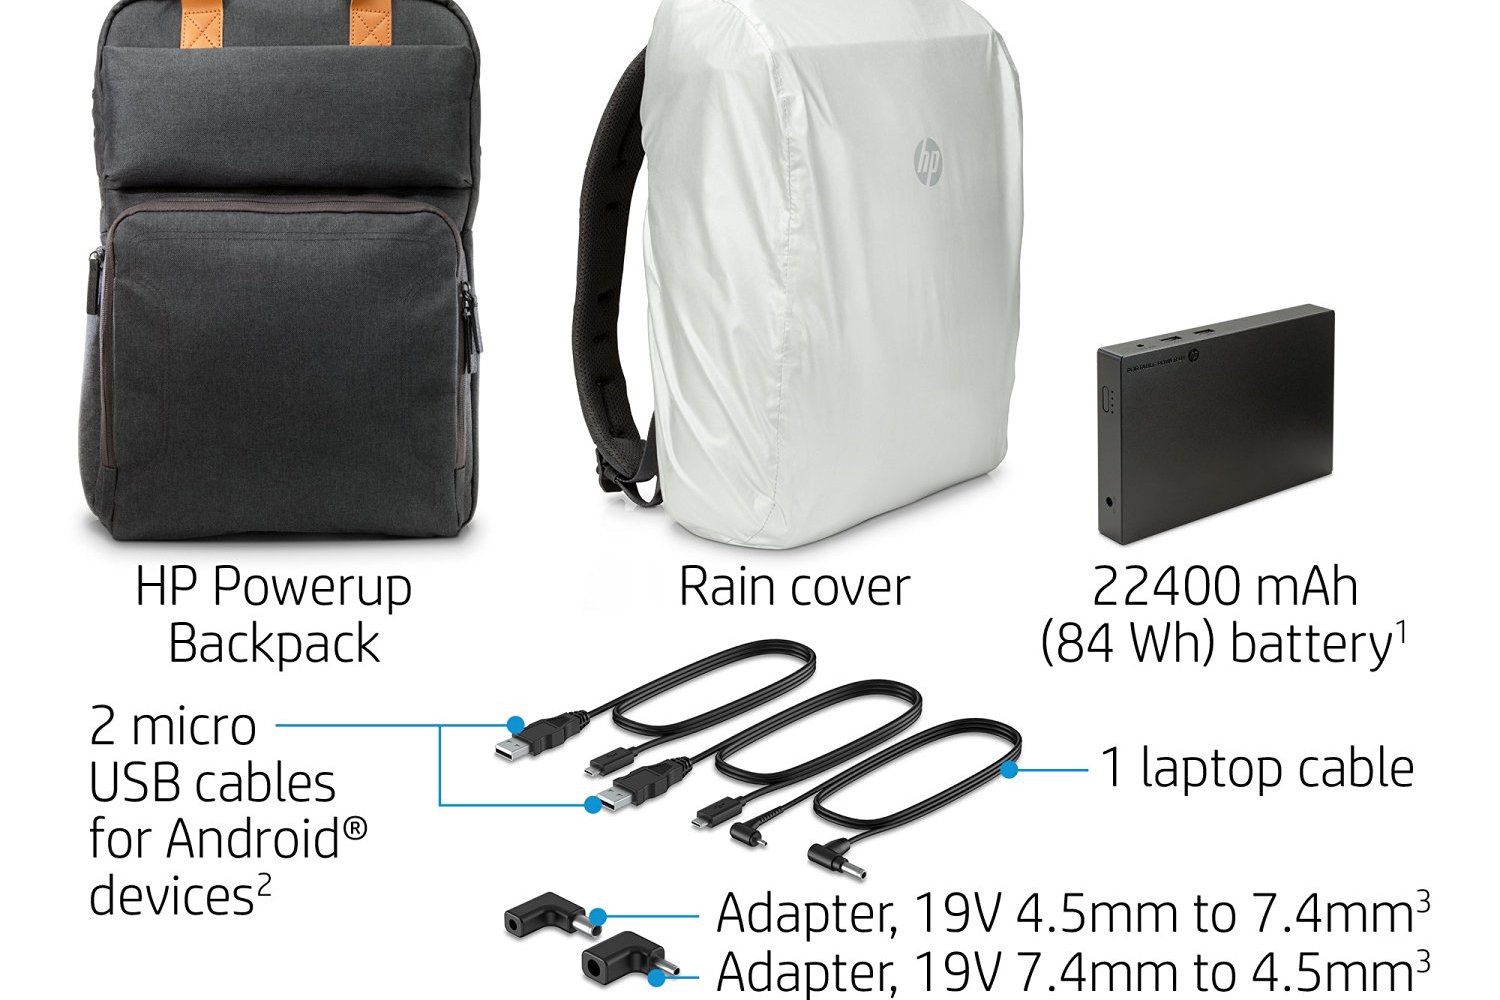 hp powerup backpack battery charge laptop phone tablet 5